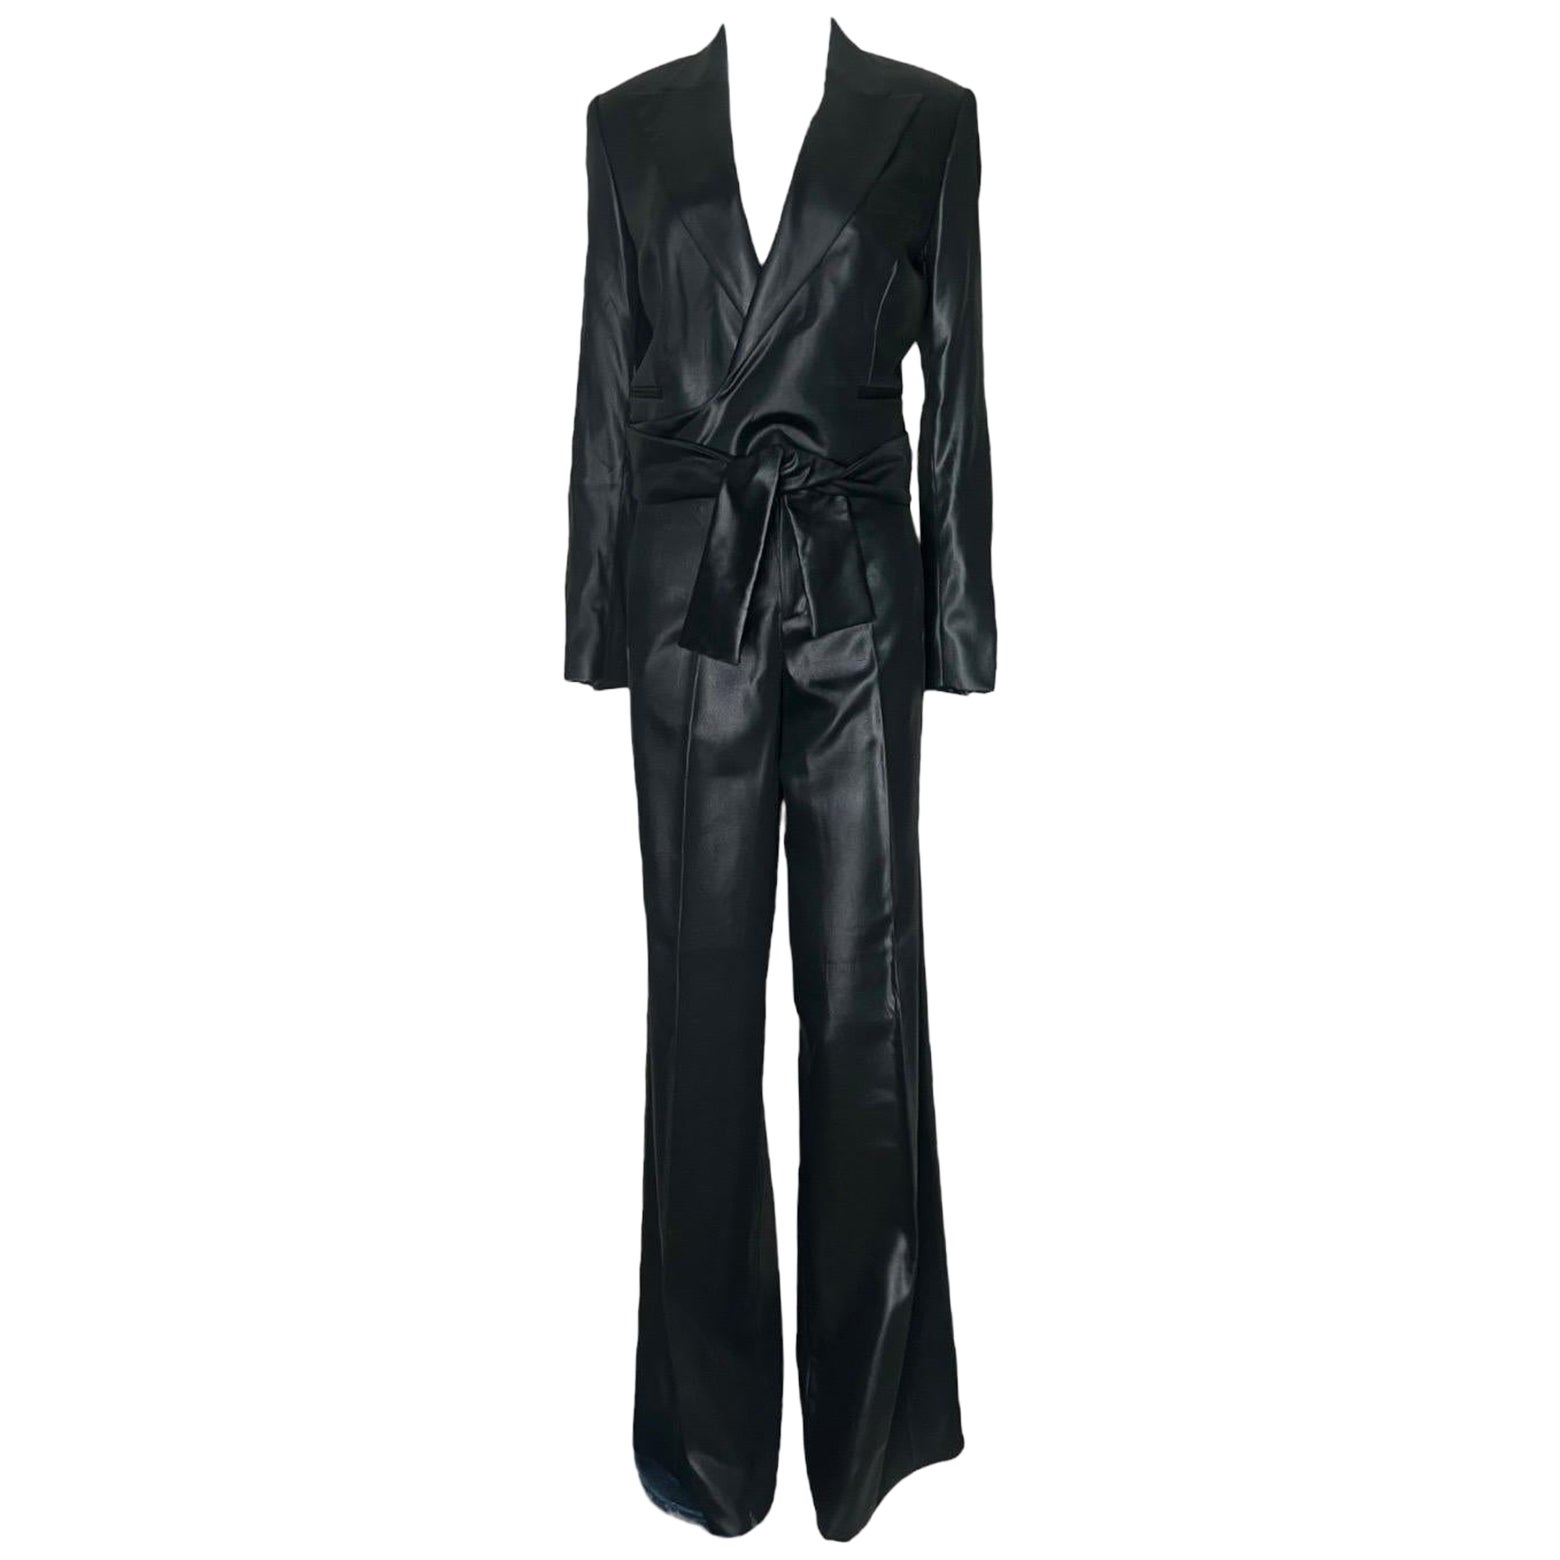 Gucci by Tom Ford Y2K - Veste portefeuille noire, style smoking, non portée, taille 40